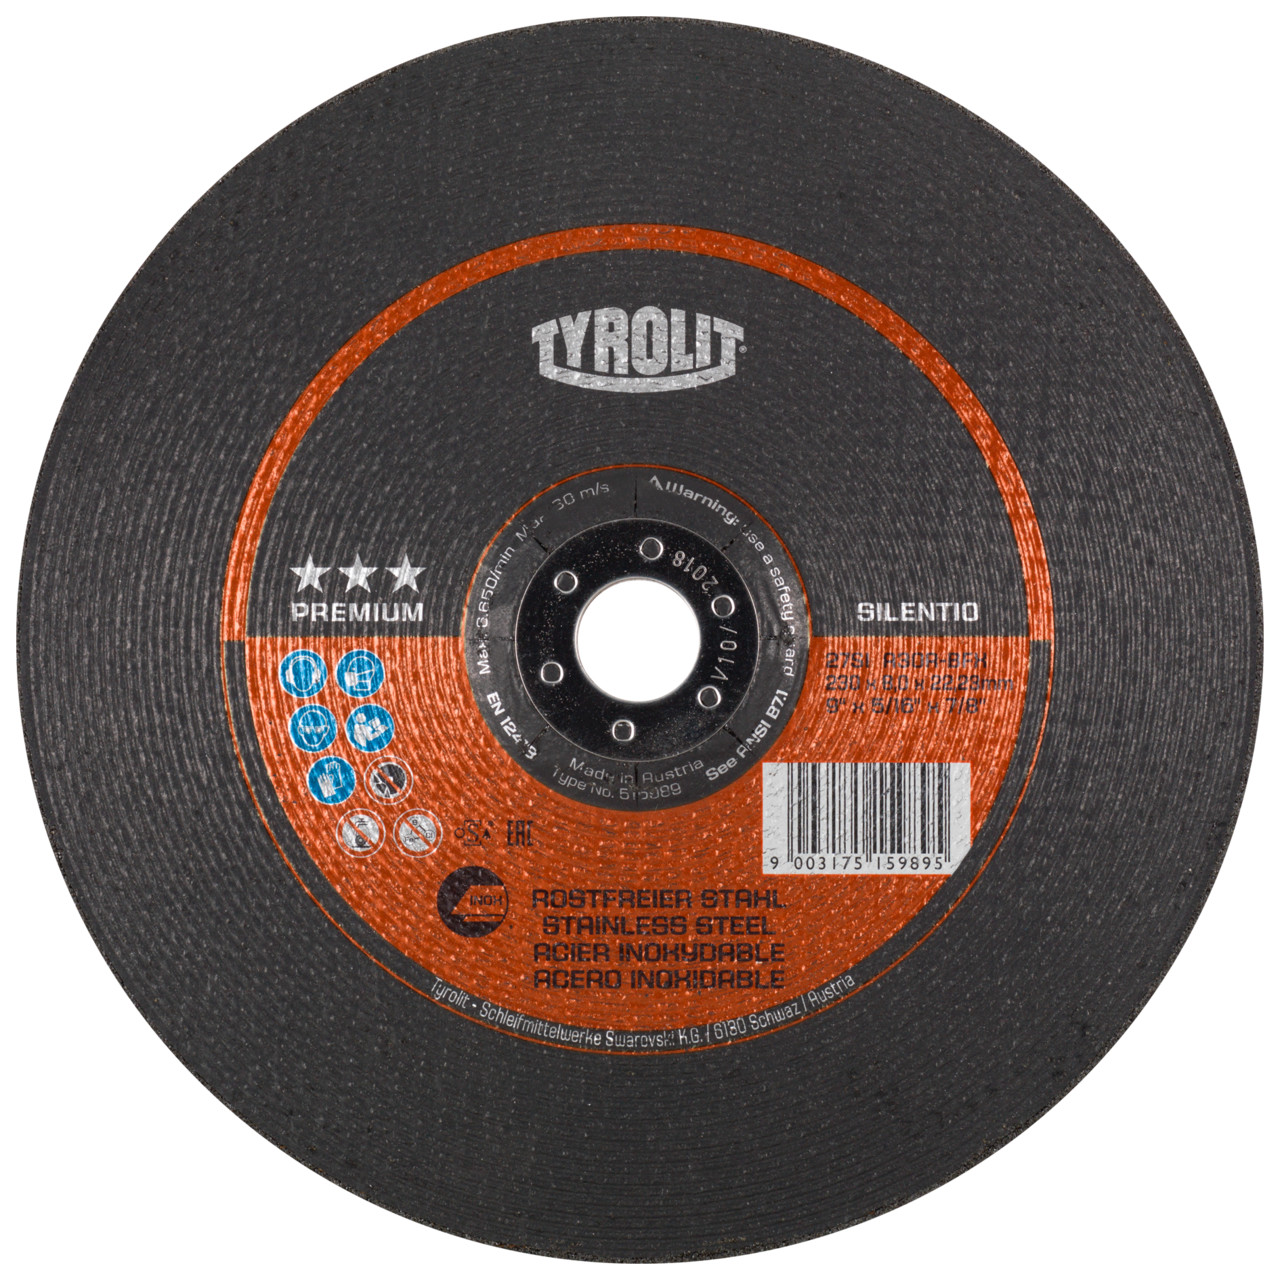 TYROLIT grinding wheel DxUxH 178x7x22.23 Silentio for stainless steel, shape: 27 - offset version, Art. 515988